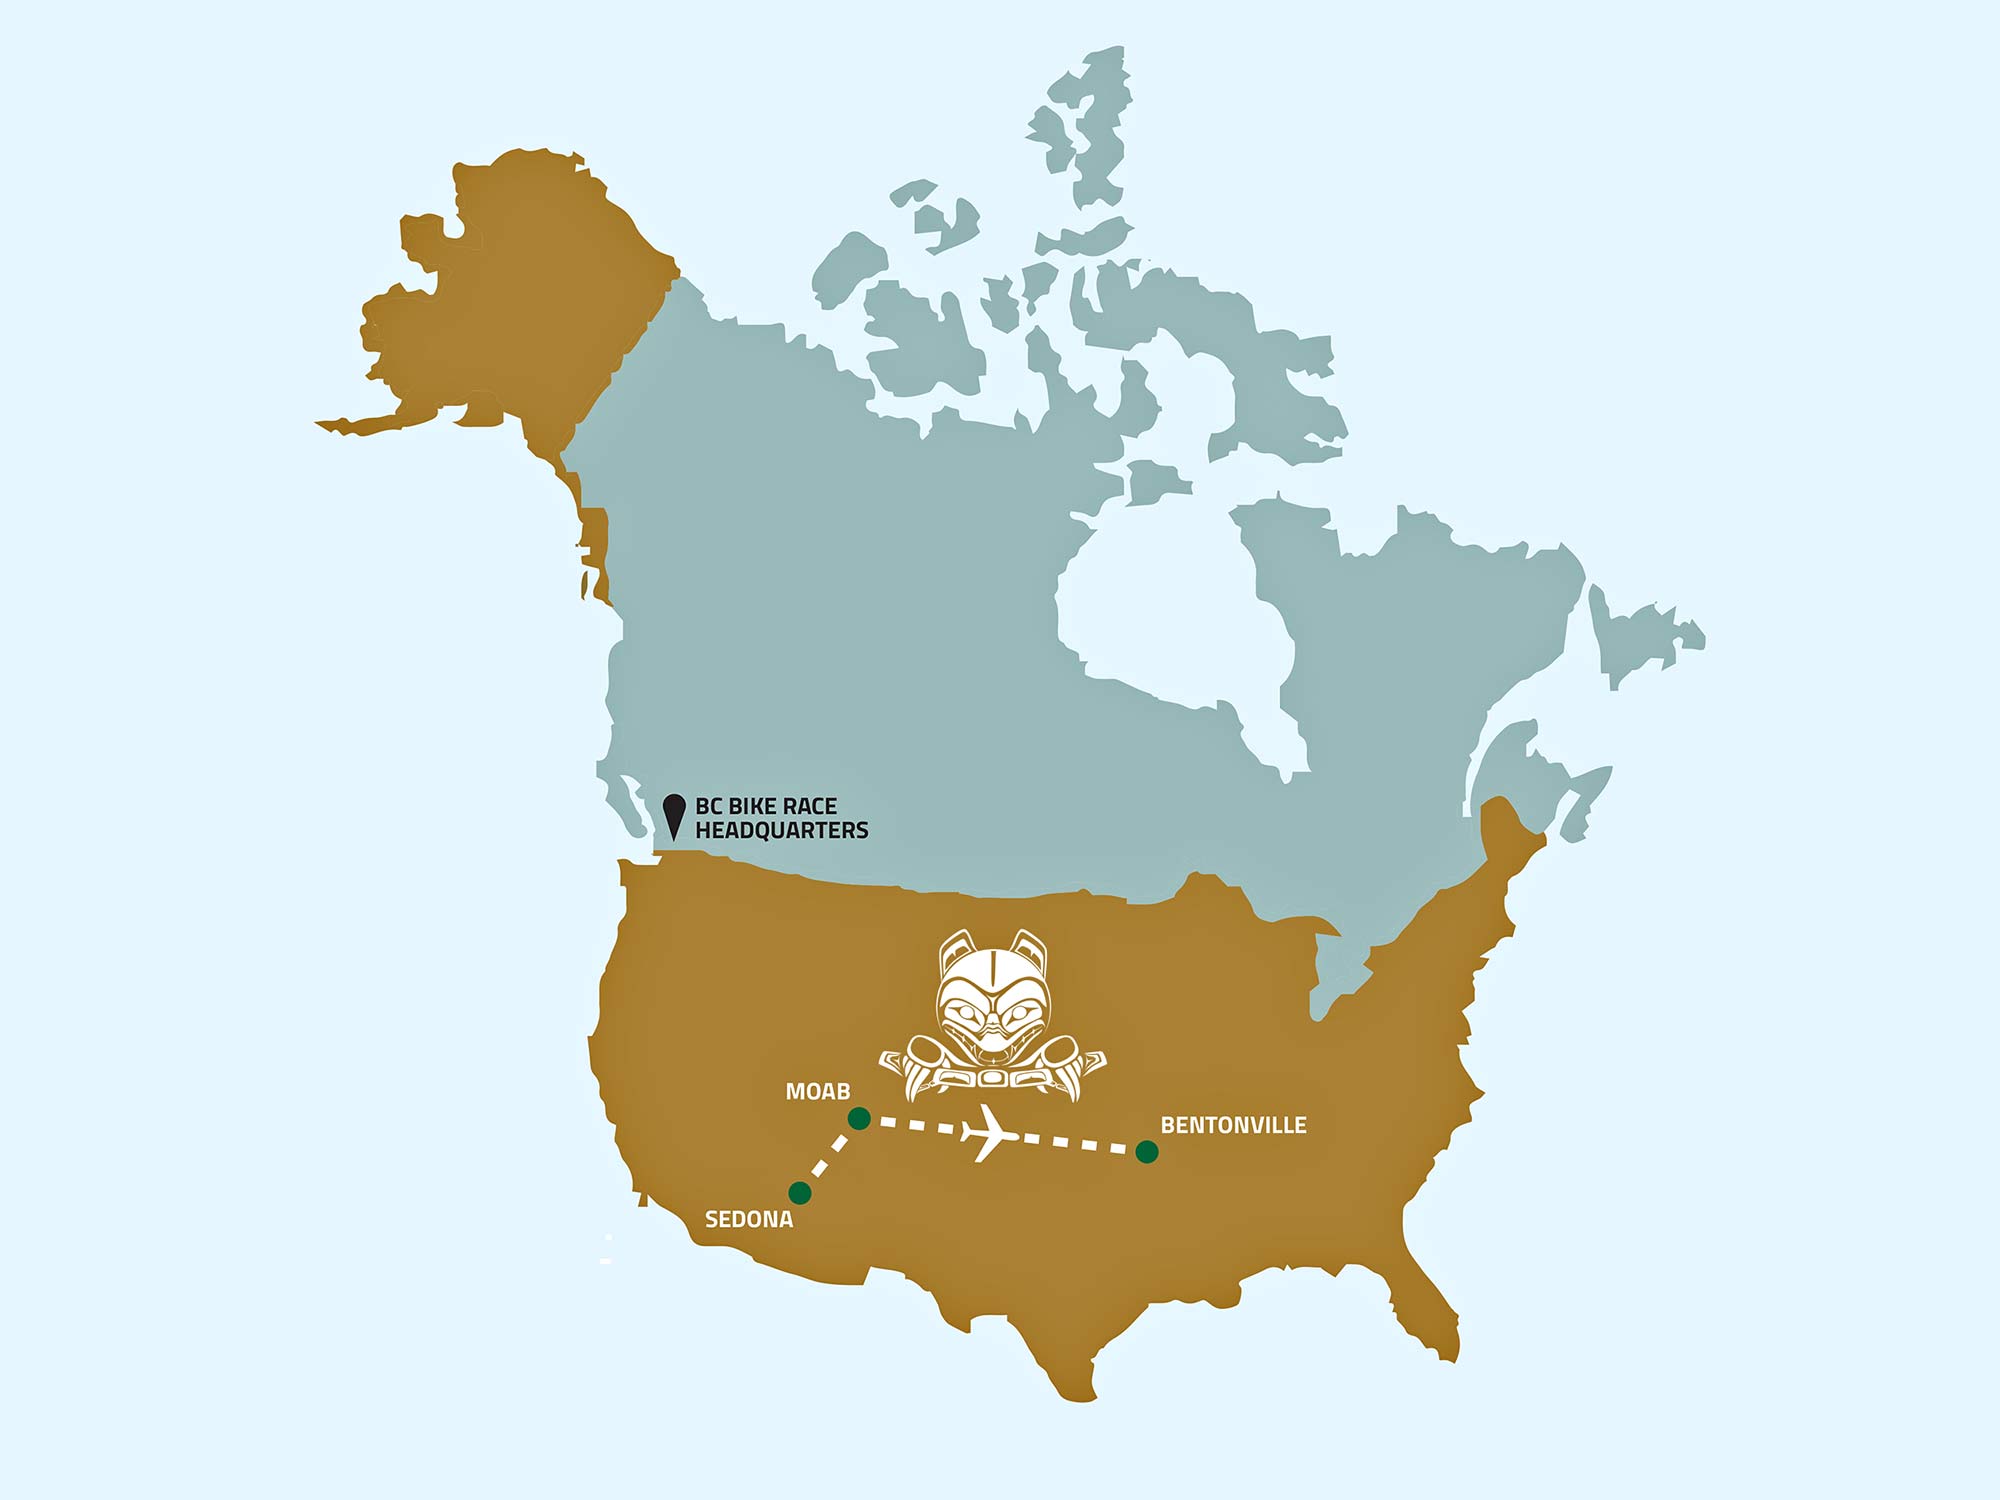 BCBR goes to America, BC Bike Race is moving to the USA for 2022, route